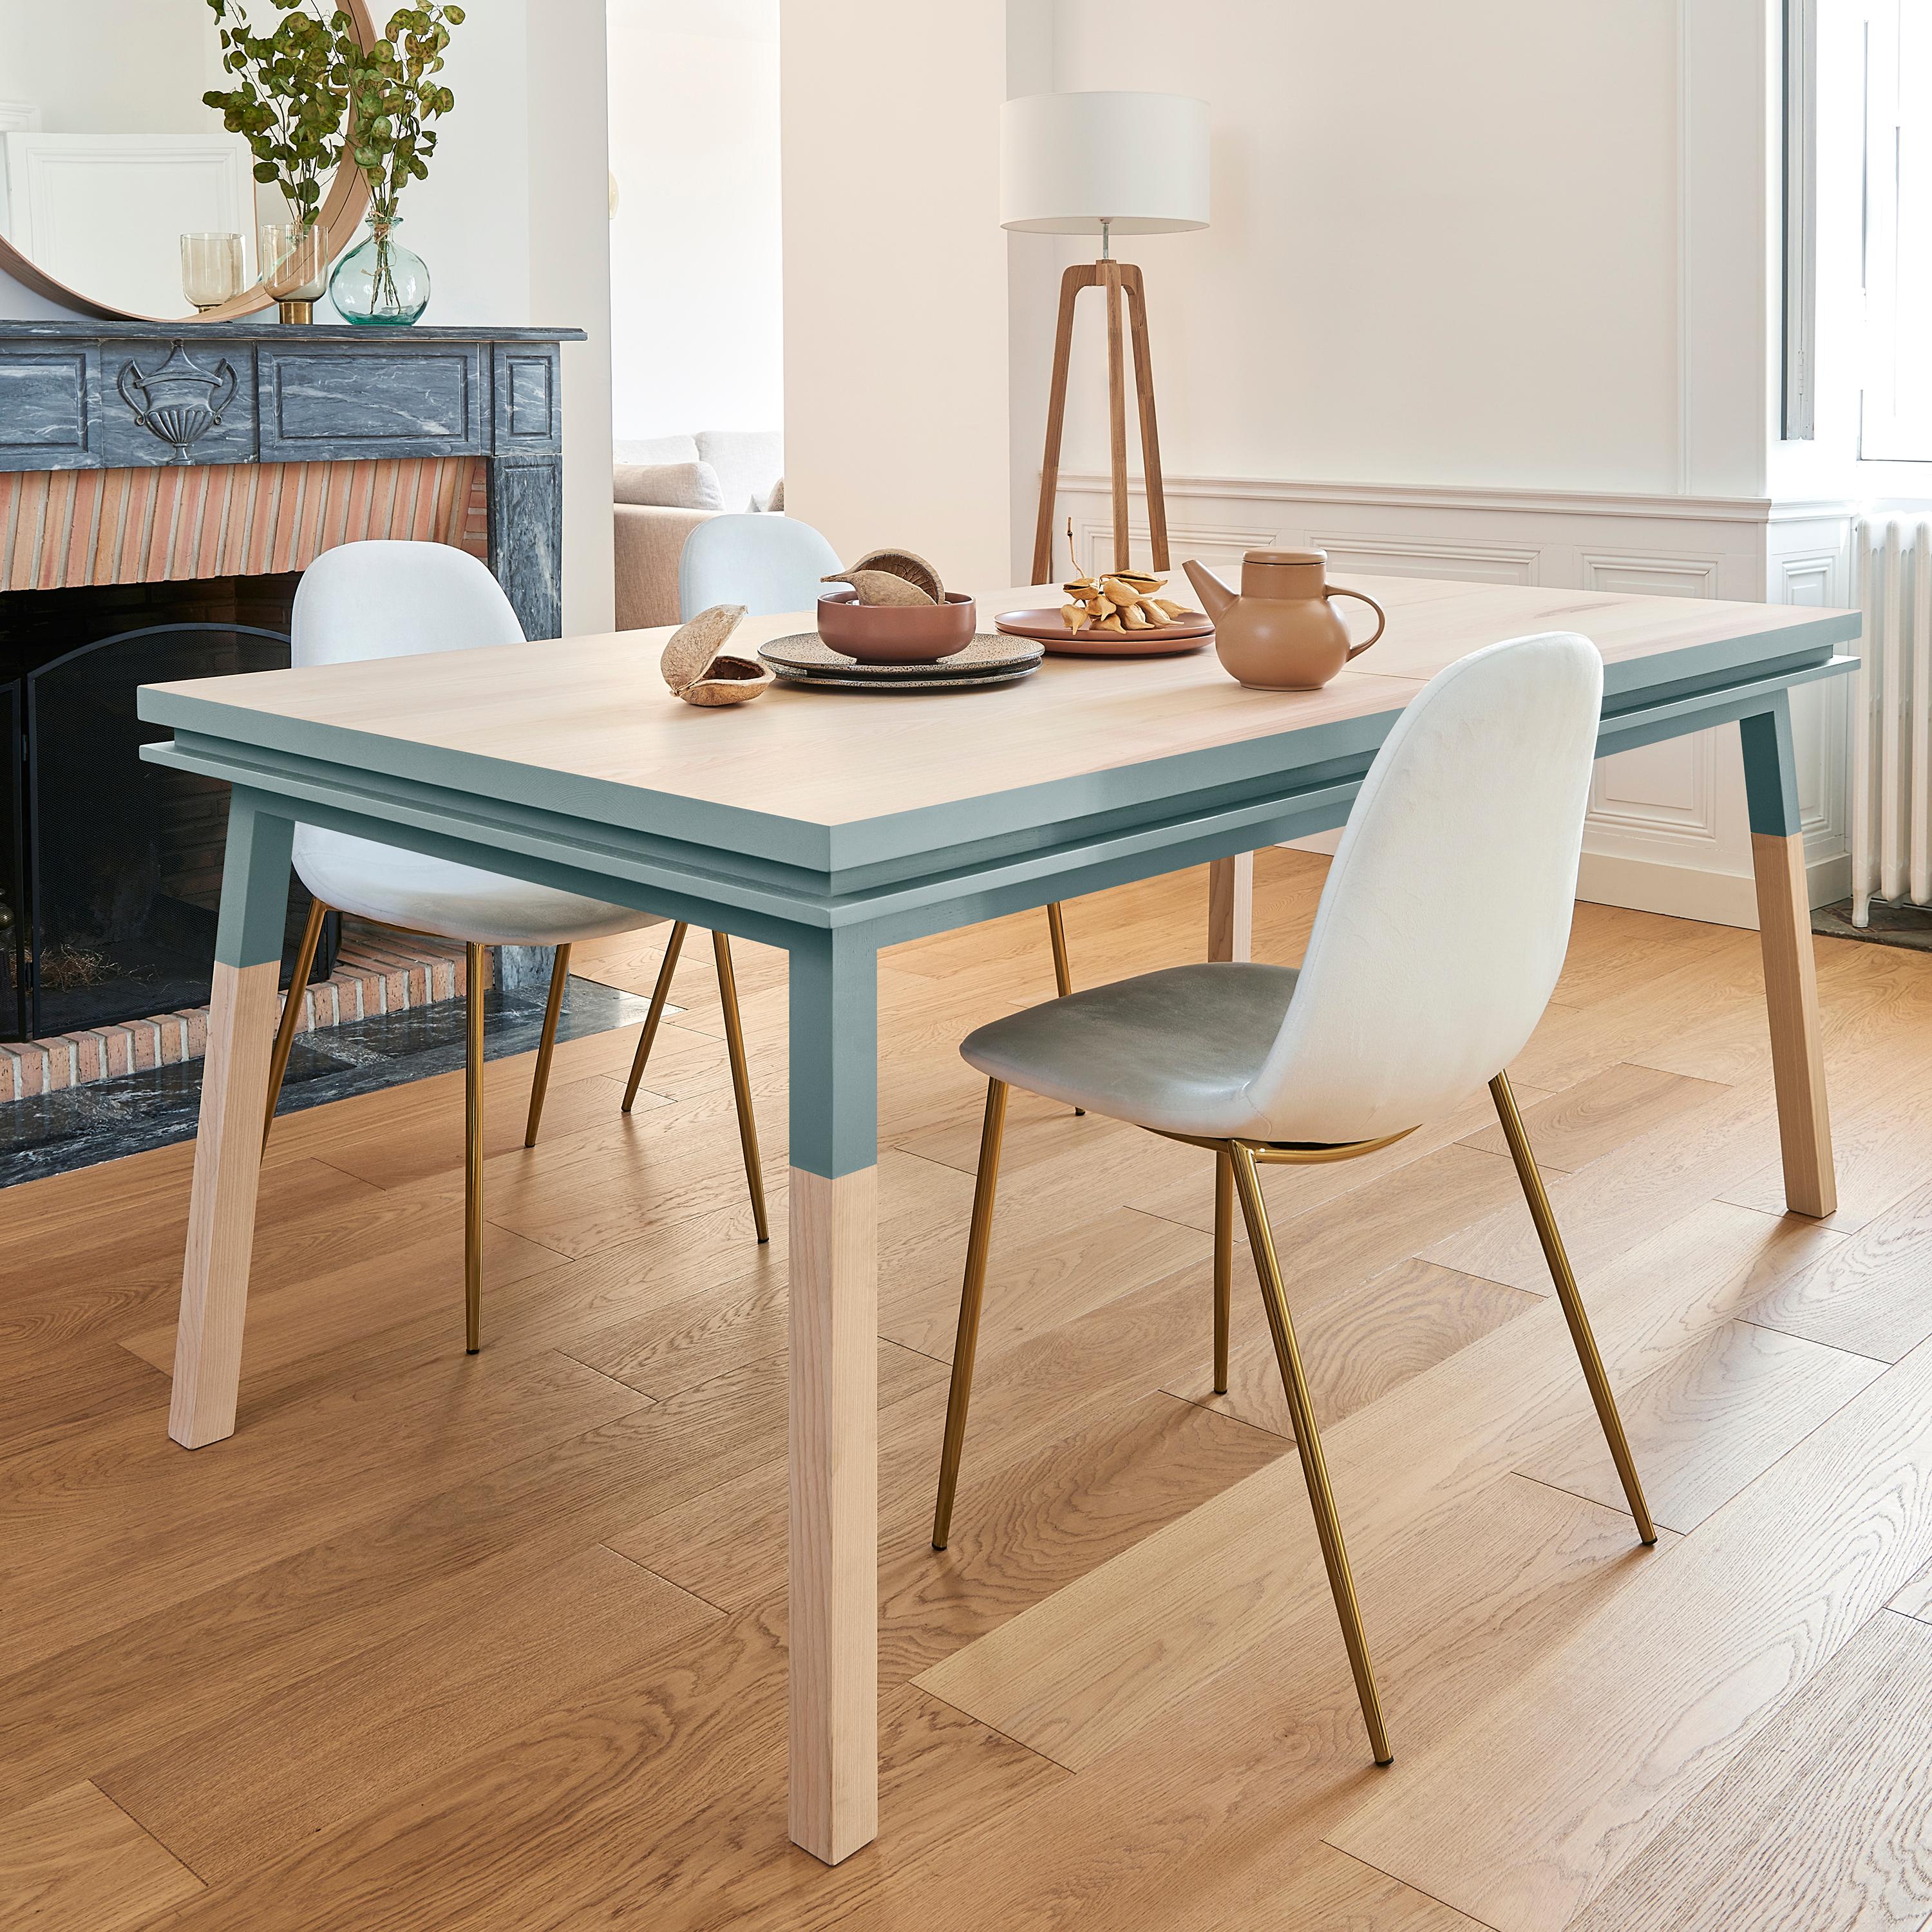 Rectangular dining table designed by Eric Gizard (Paris, France) 

100% solid ash wood from French sustainably managed forests.

Presented Length: closed 220 cm / 86 .6’’ , 1 unfolded extension 260 cm / 102.4'', 2 unfolded extensions 300 cm /